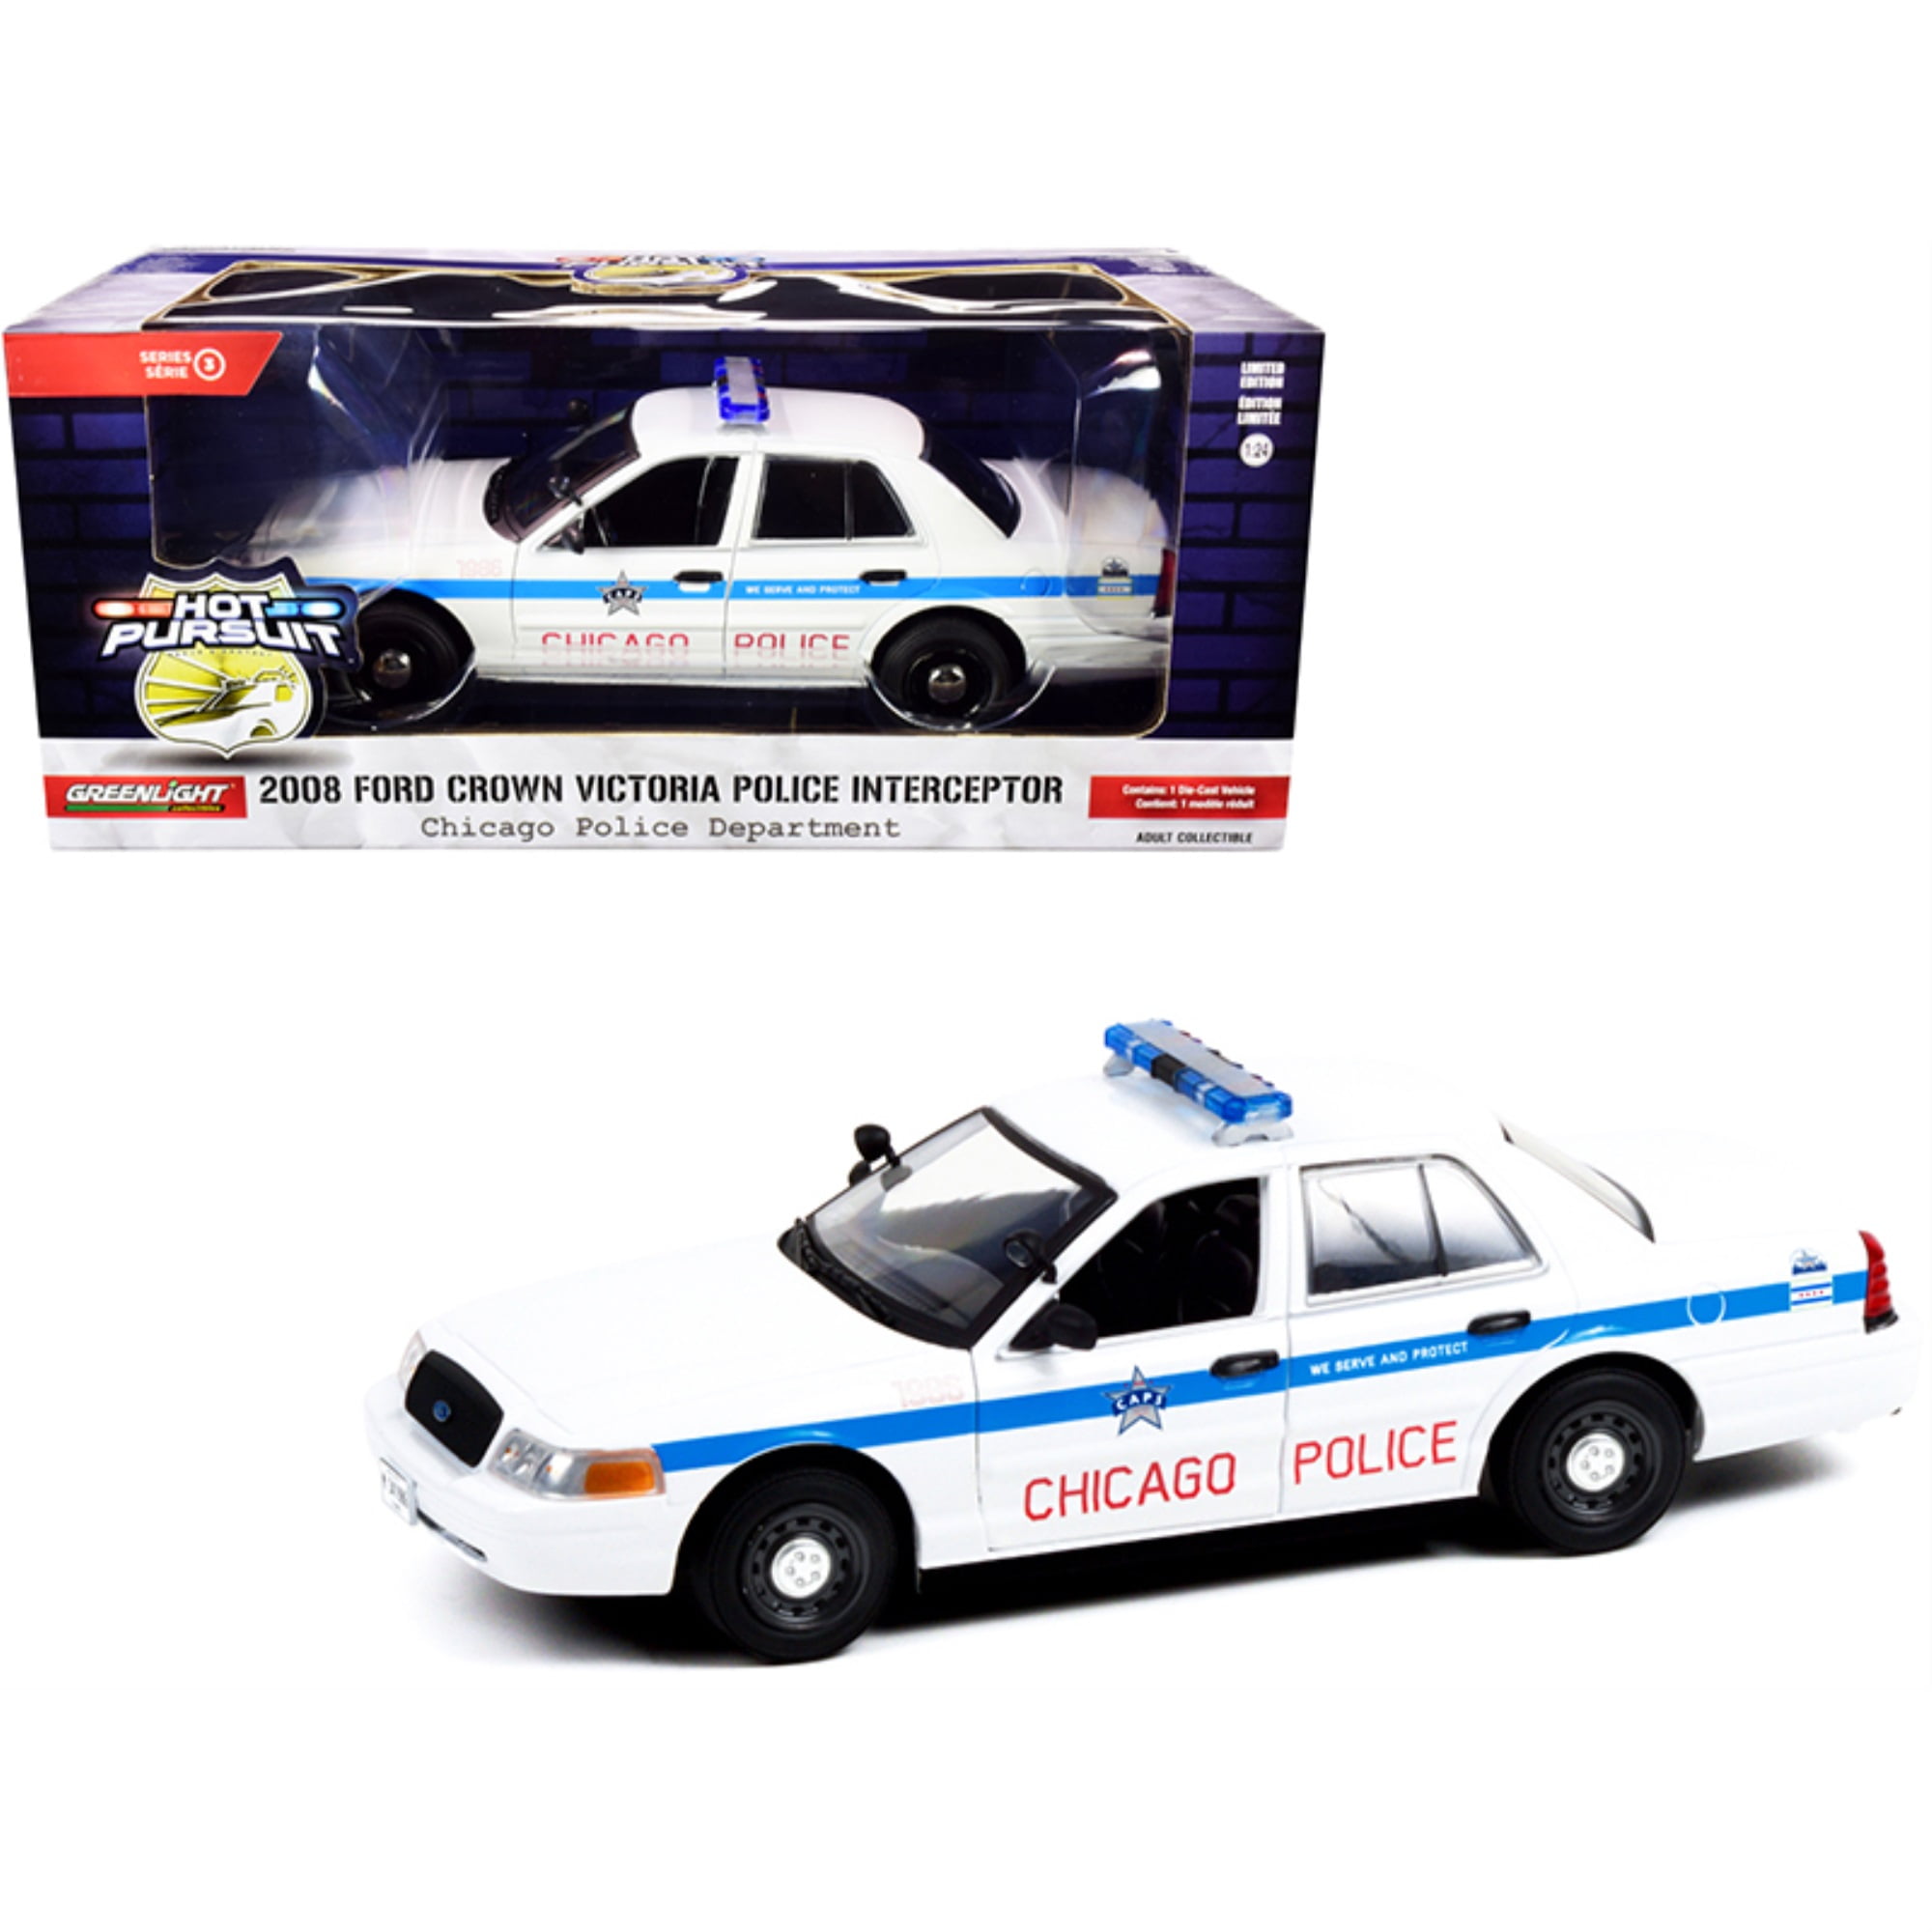 Illinois State Police 1/43rd Scale Slot Car Waterslide Decals 